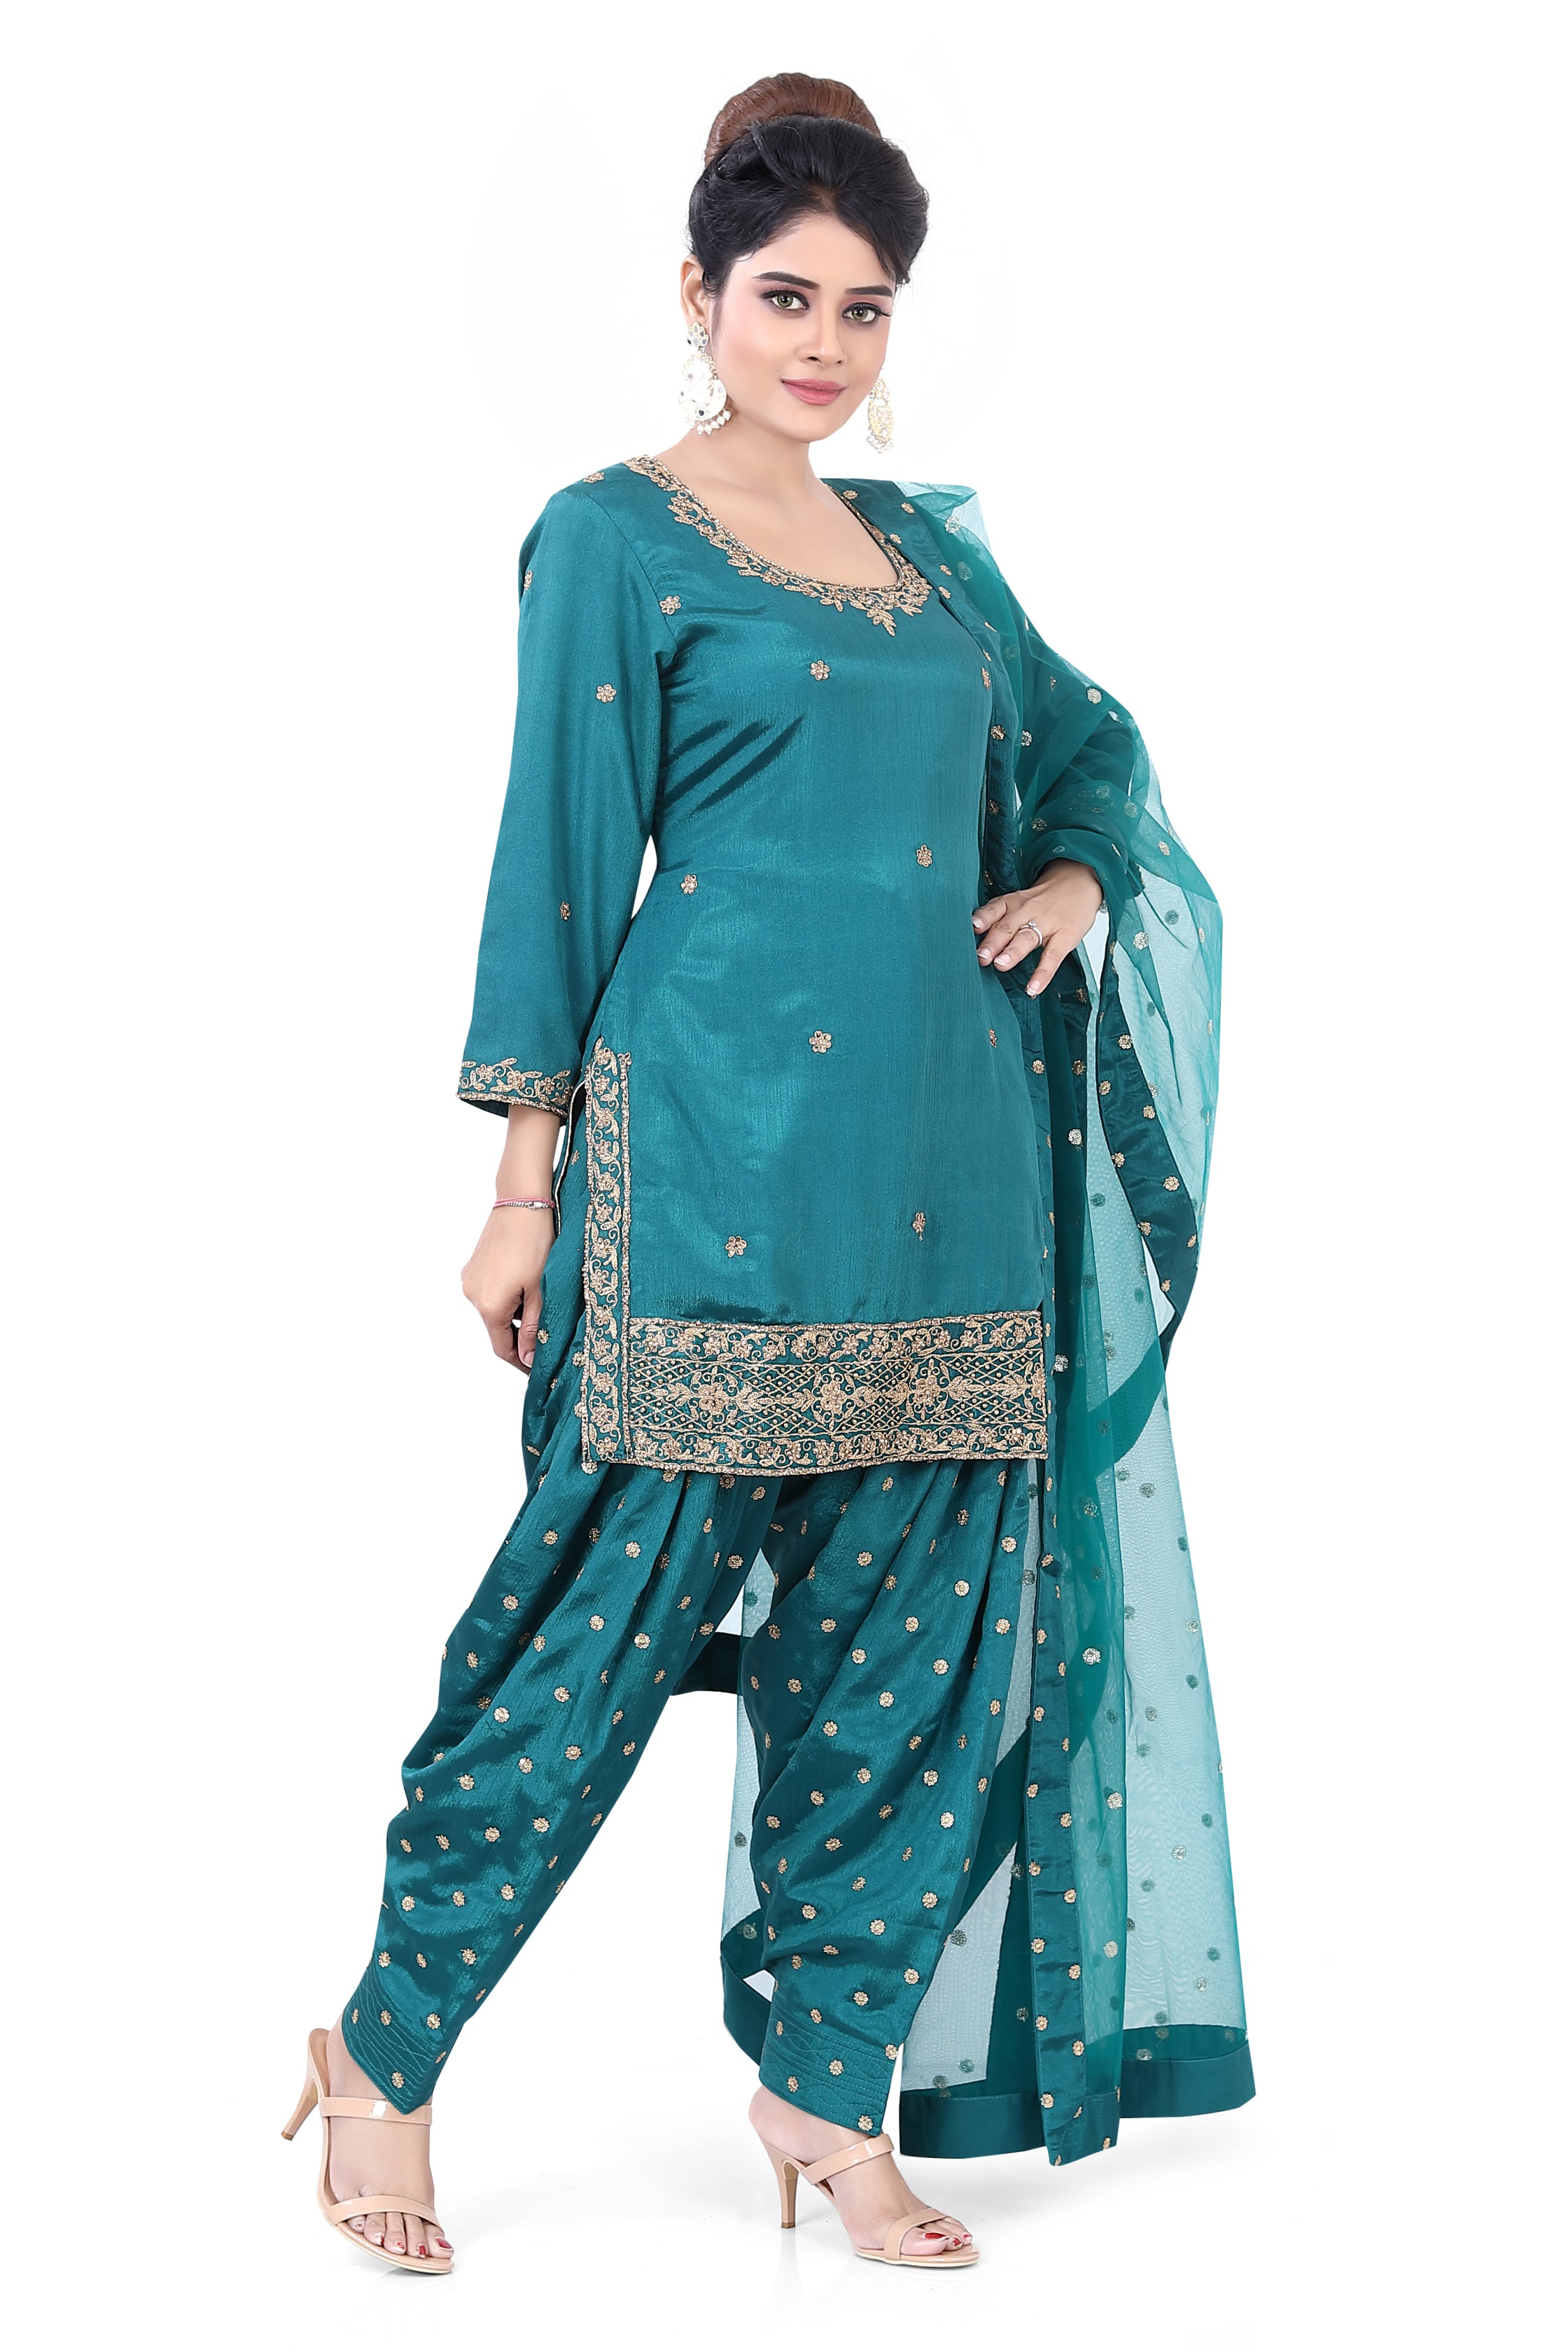 Bottle Green Colour Straight Chinon Dhoti Suit-SS-4006